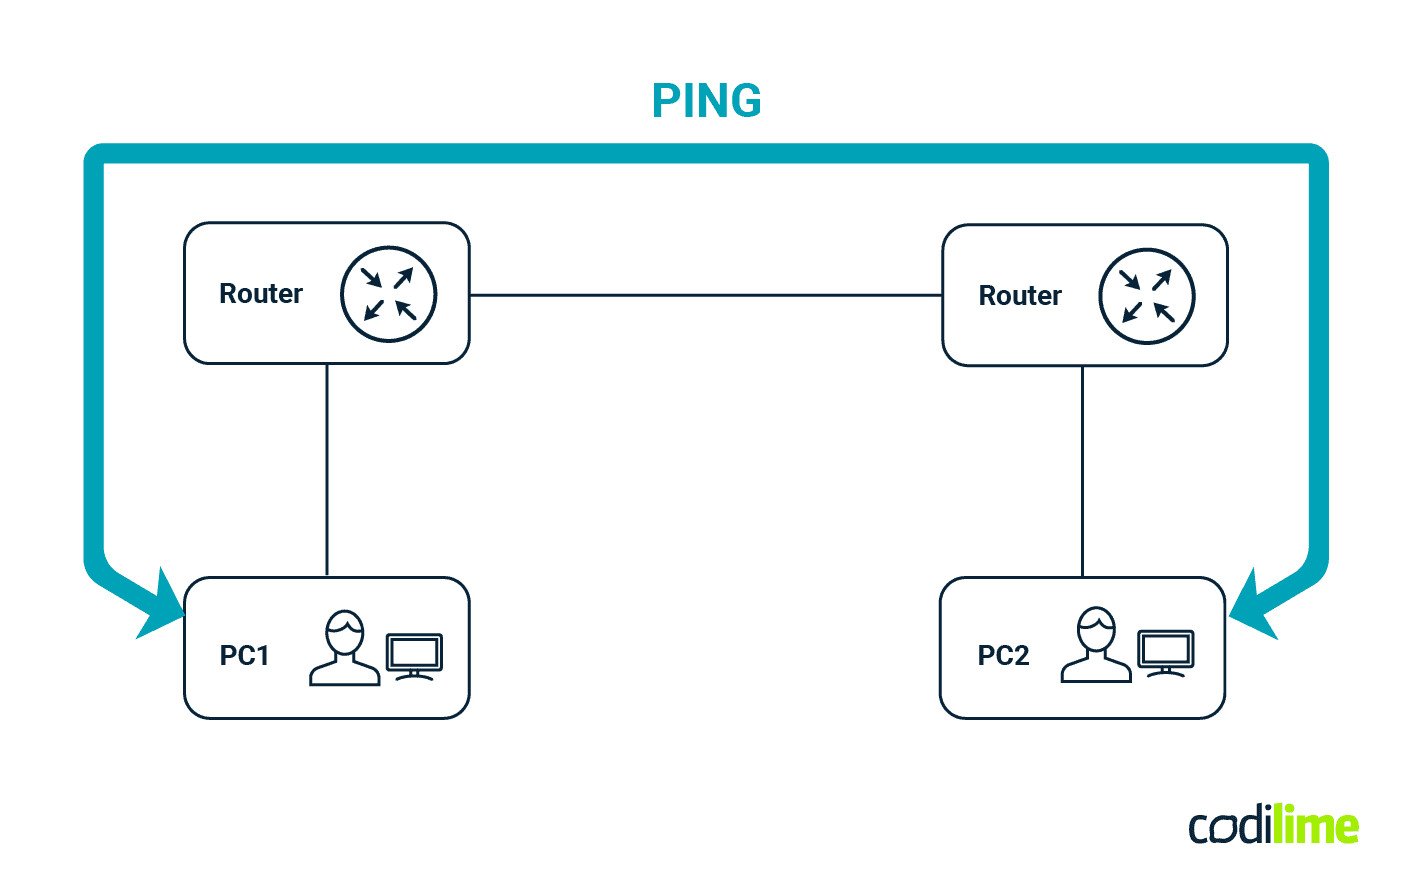 containerlab communication between PC1 and PC2